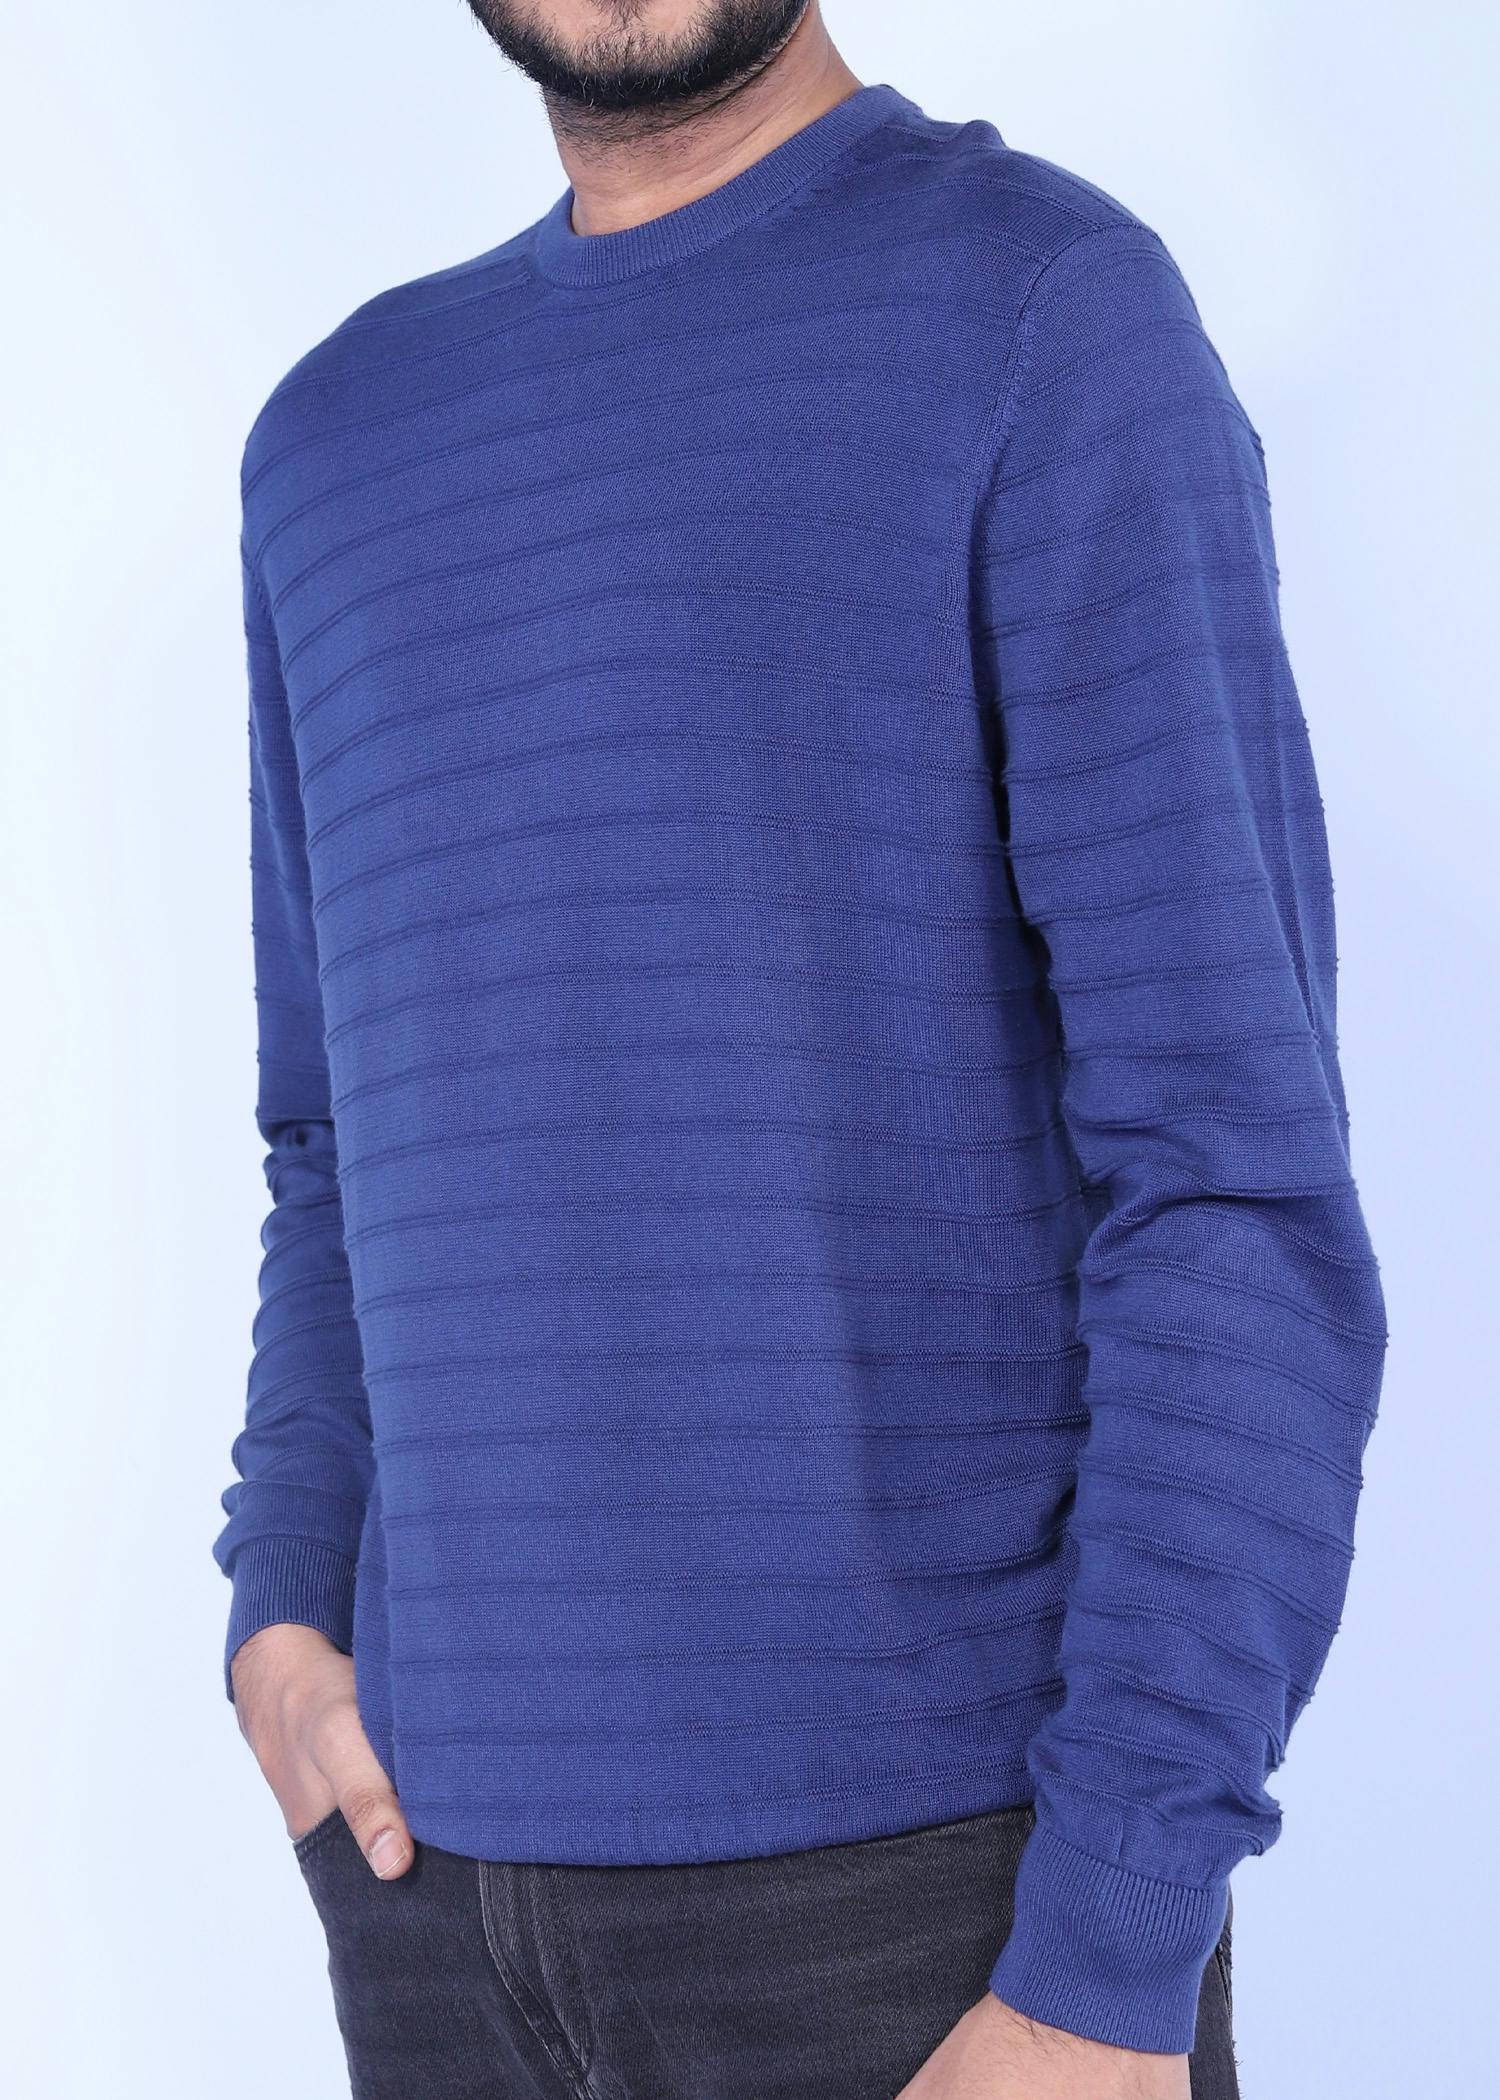 olibird sweater blue color half side view